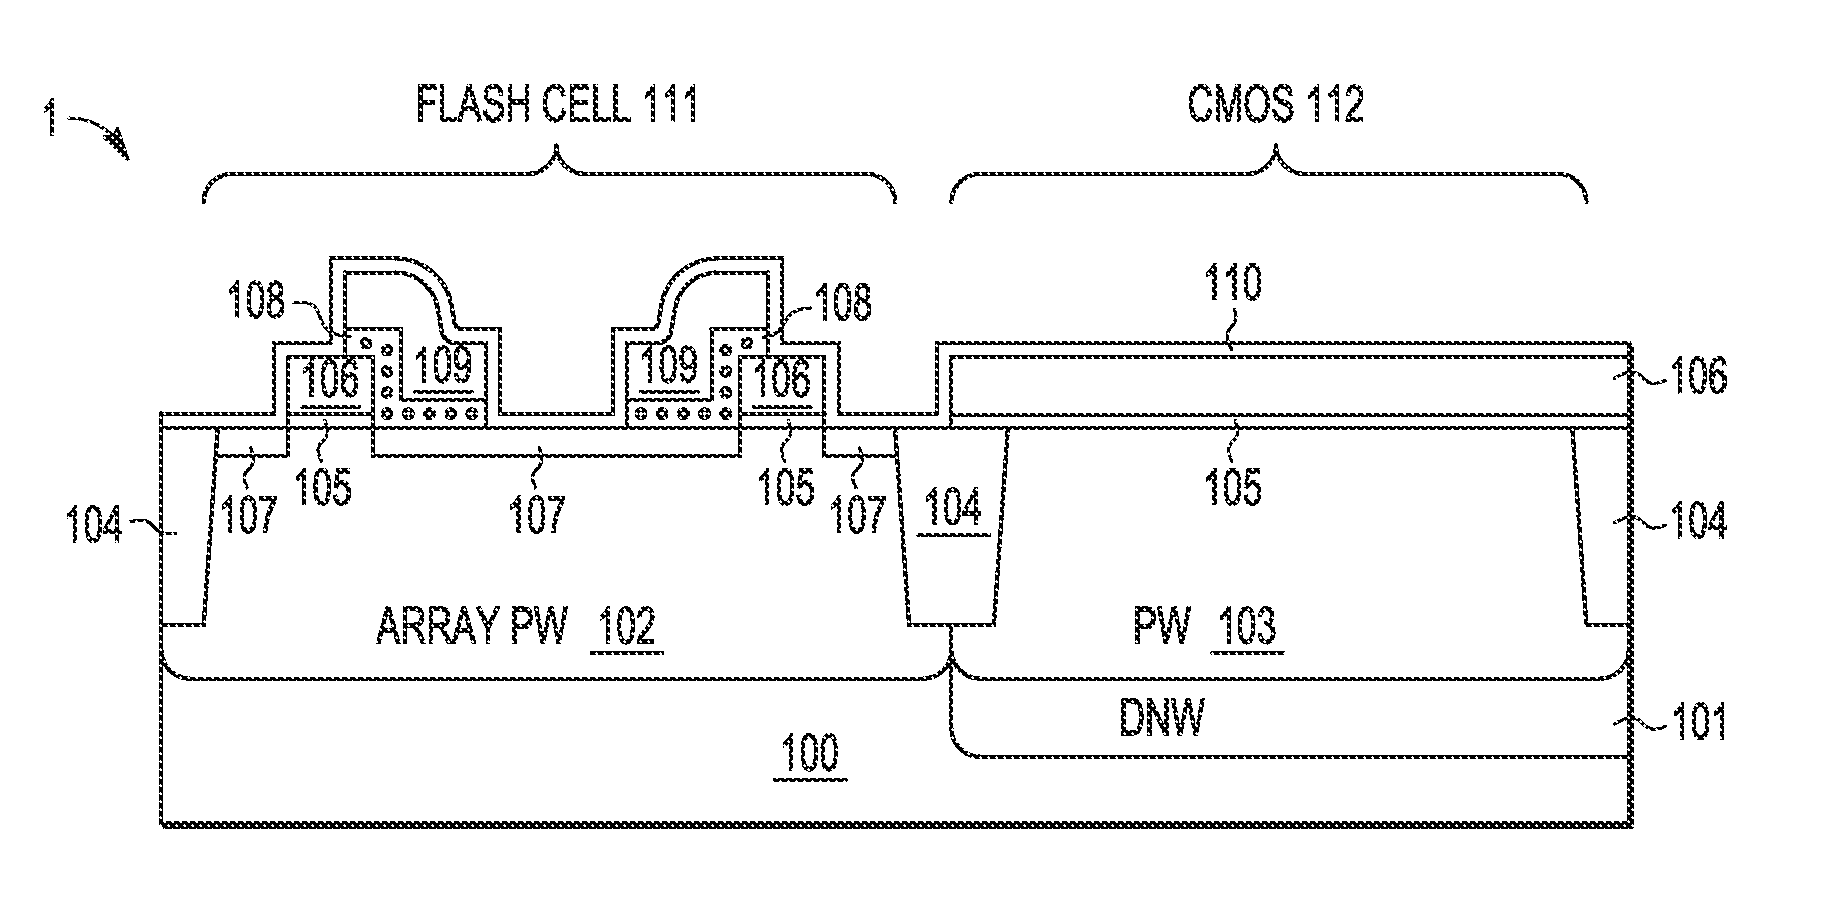 Method to Form a Polysilicon Nanocrystal Thin Film Storage Bitcell within a High K Metal Gate Platform Technology Using a Gate Last Process to Form Transistor Gates